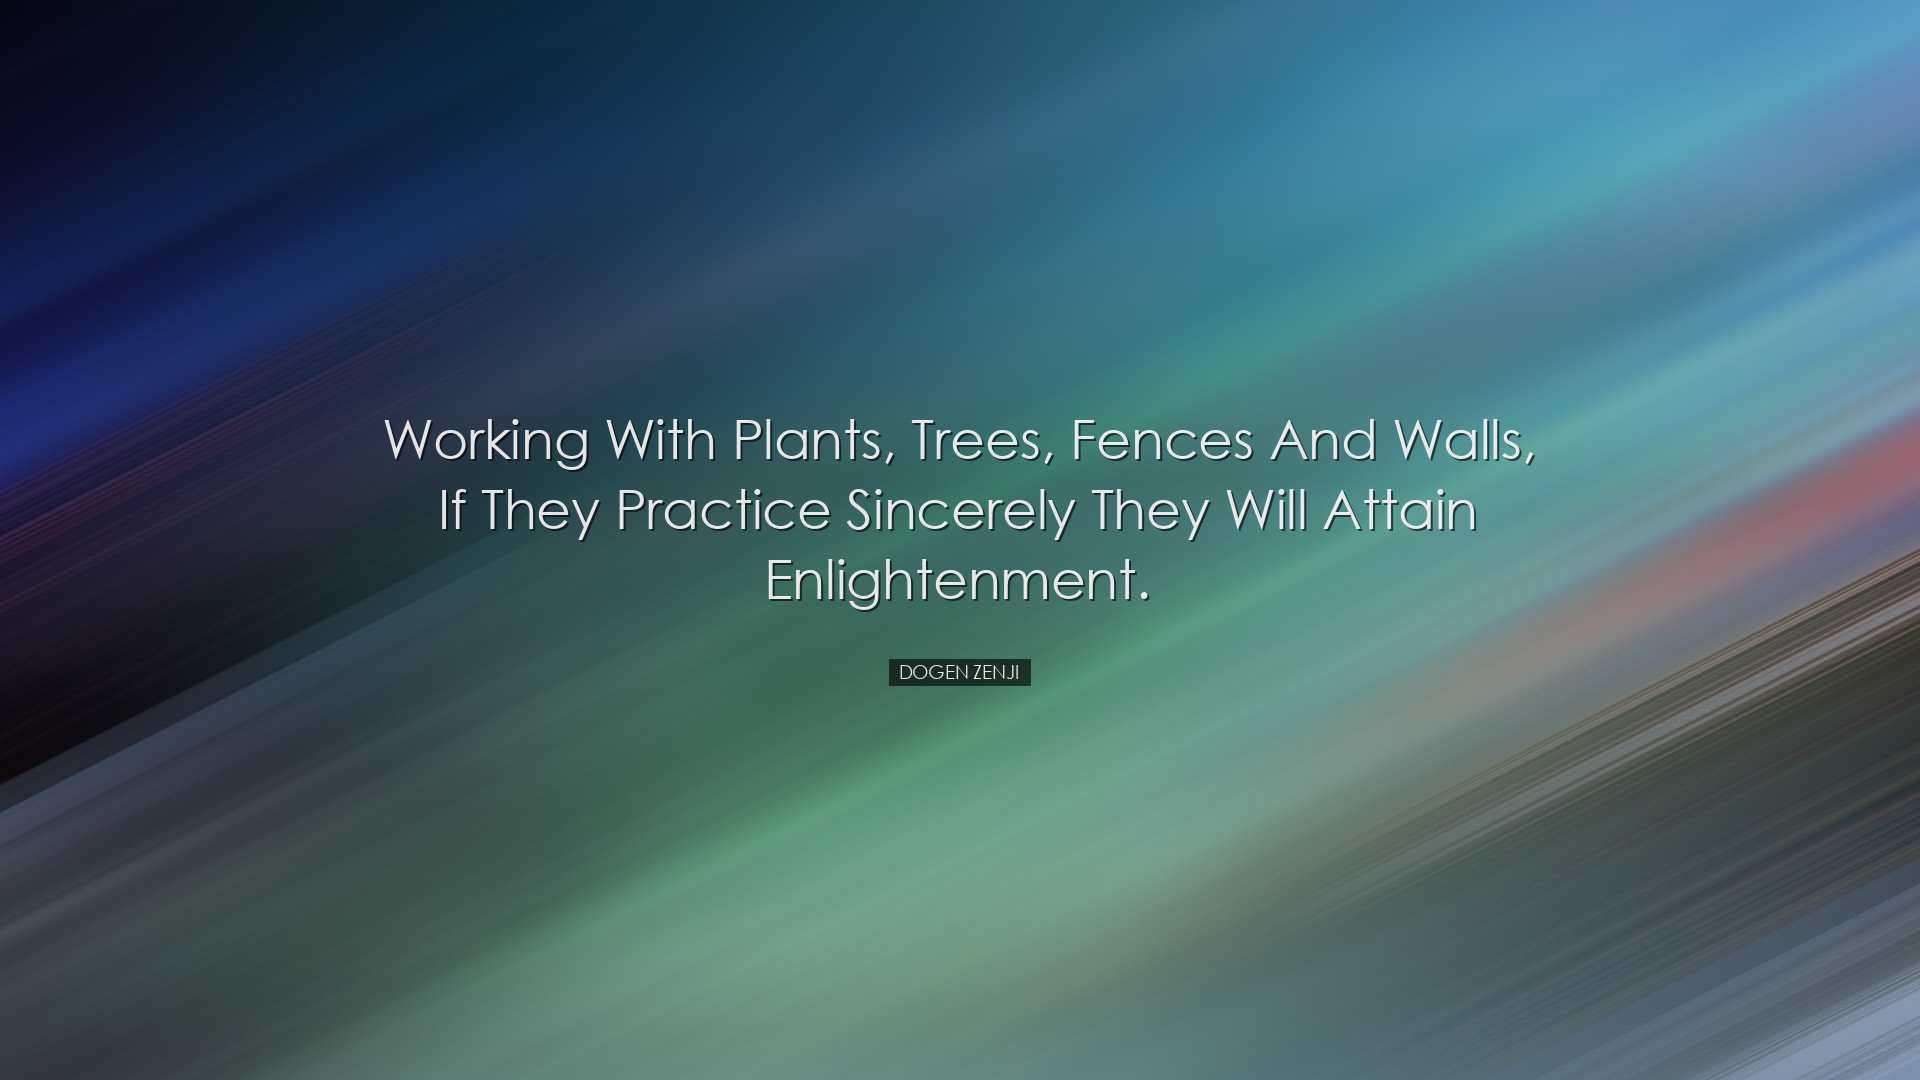 Working with plants, trees, fences and walls, if they practice sin